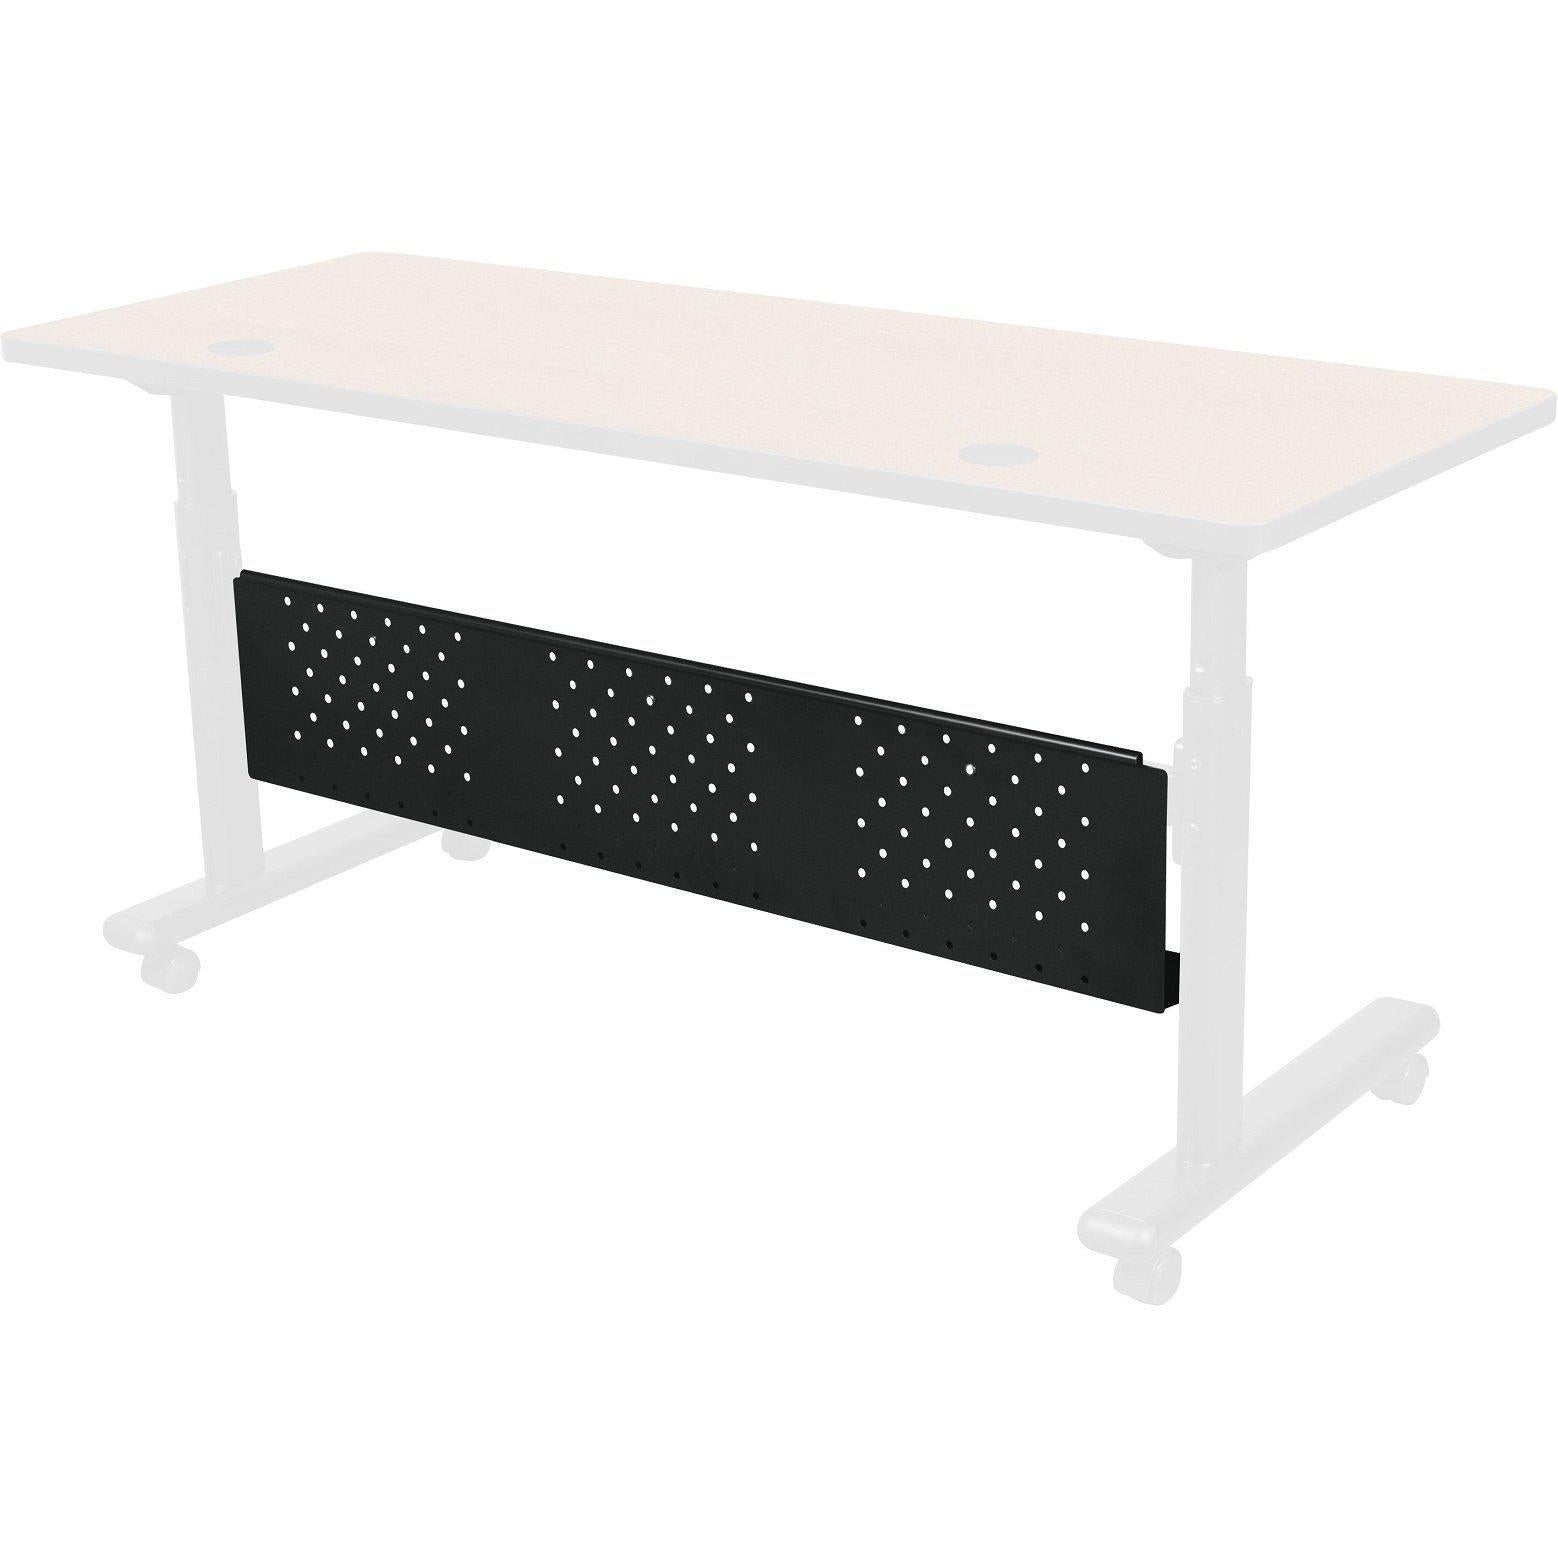 Modesty Panel for Height-Adjustable Sit/Stand Flipper Table-Tables-